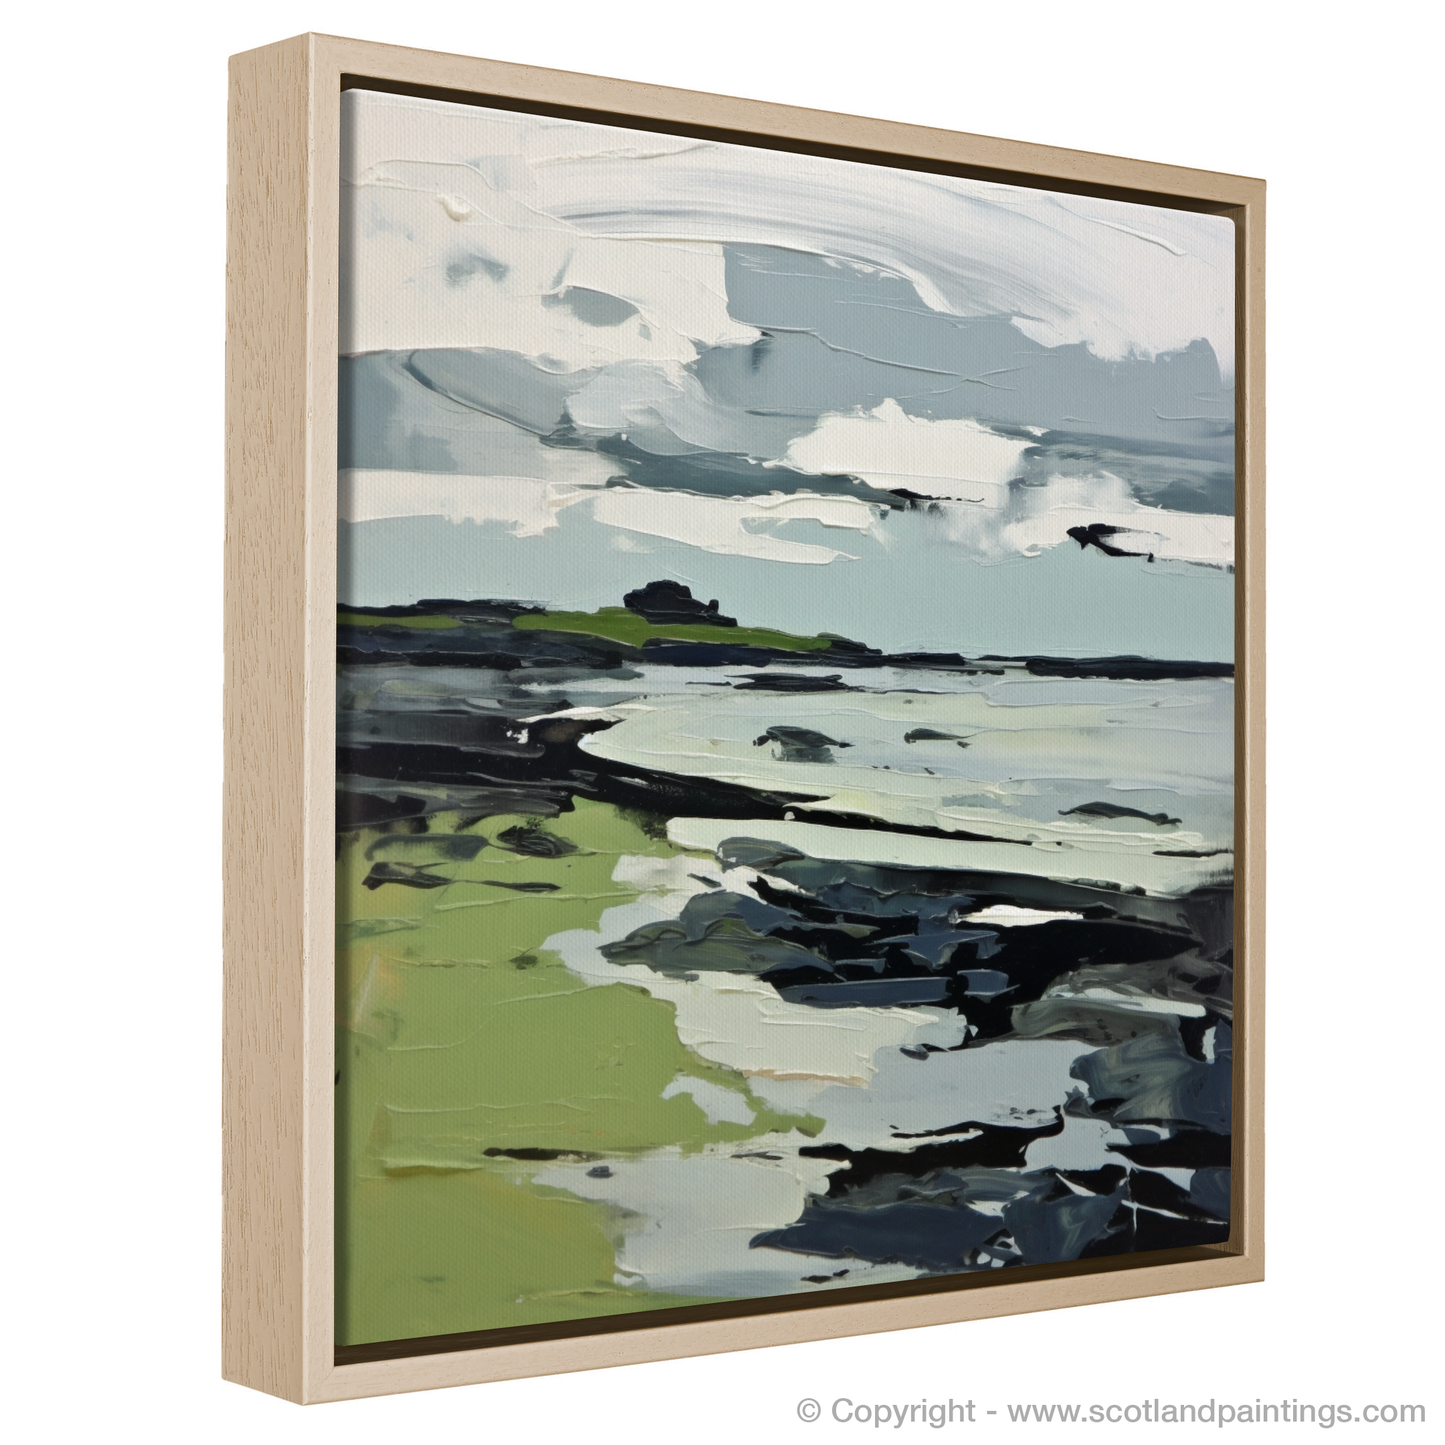 Painting and Art Print of Largo Bay, Fife entitled "Largo Bay Unleashed: An Expressionist Ode to Scottish Shores".